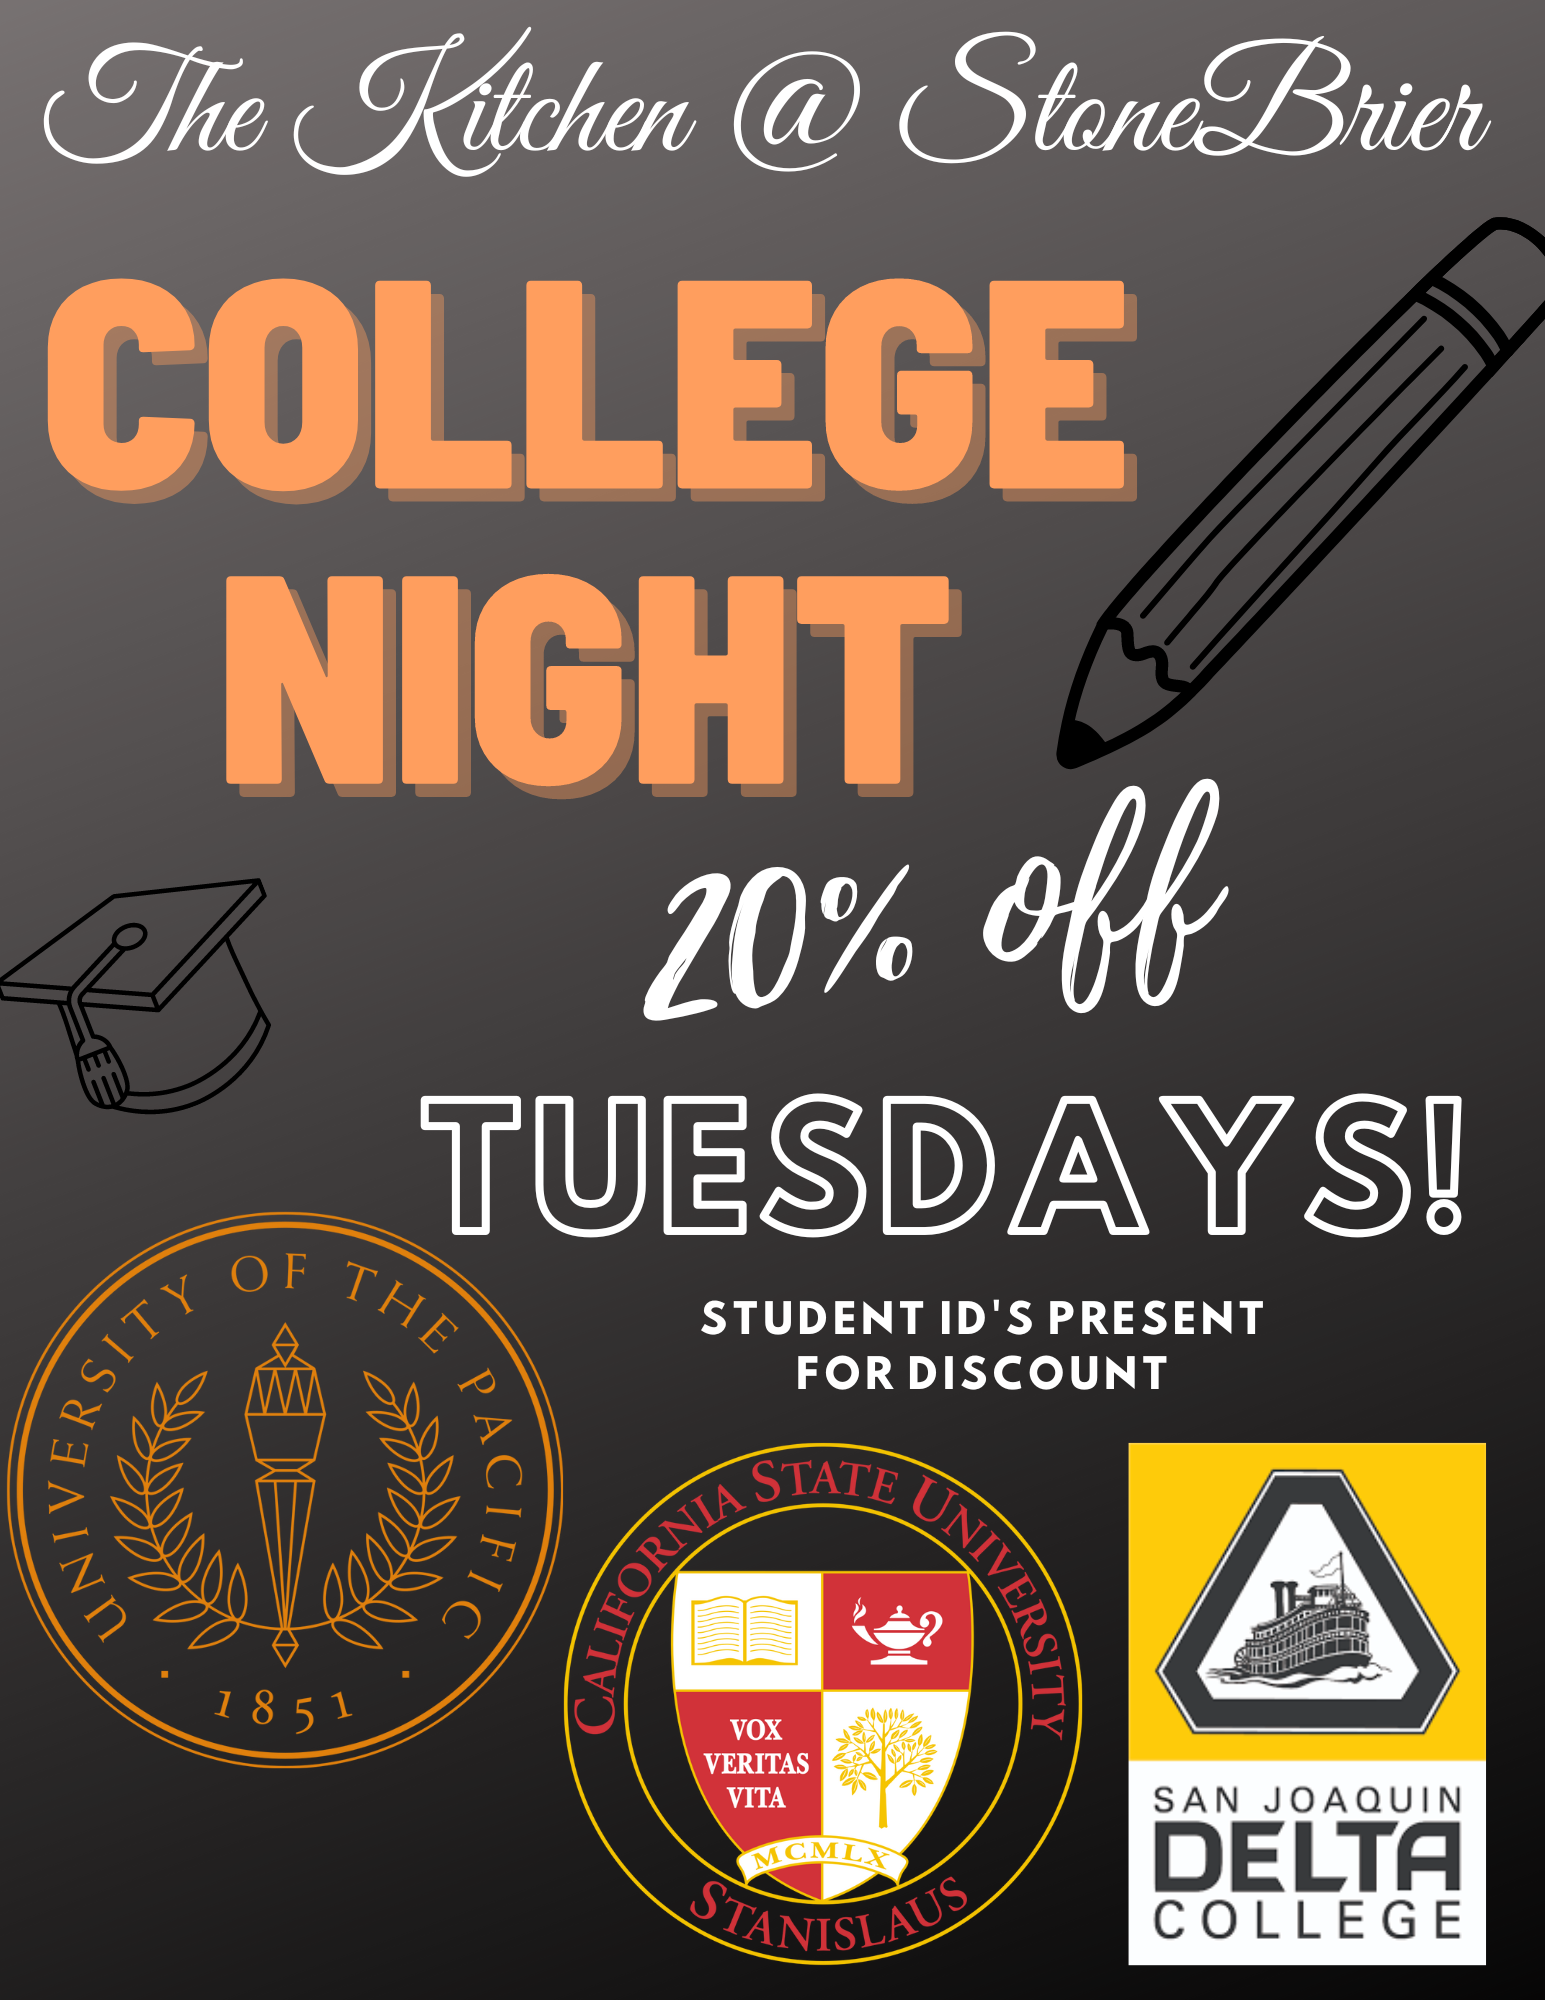 promotion for college students to bring ID to receive 20% off